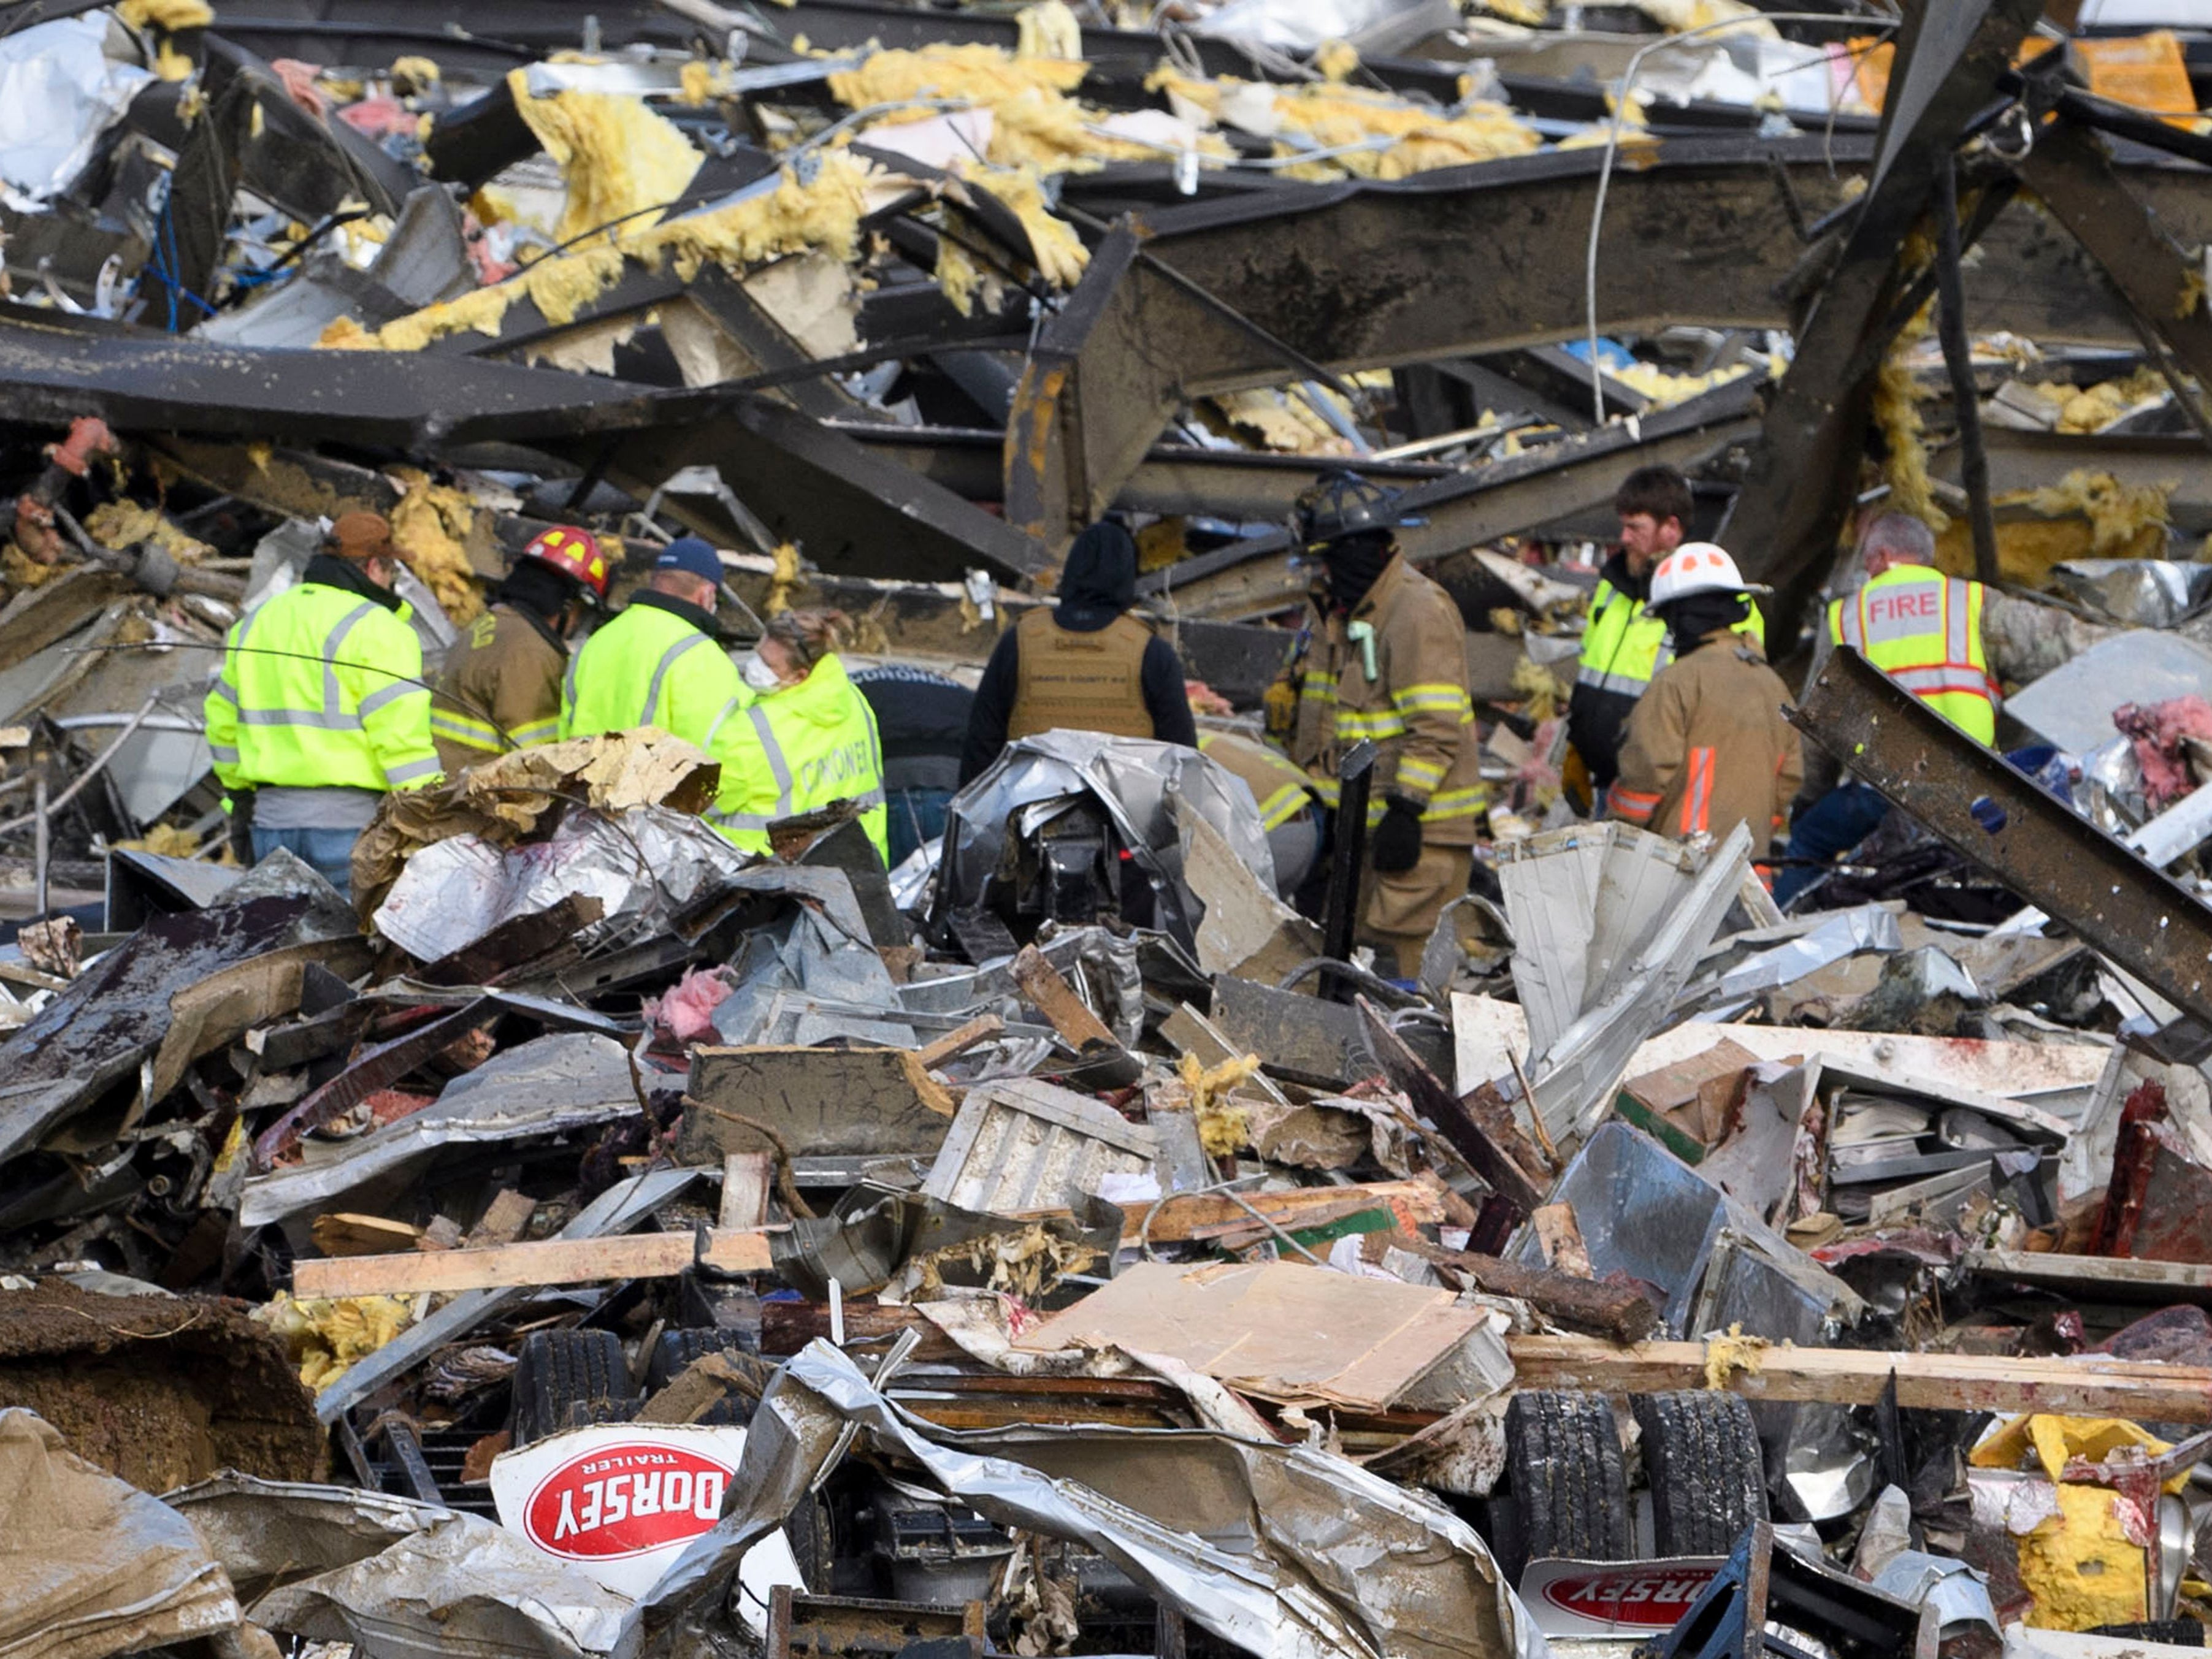 Emergency workers search what is left of the Mayfield Consumer Products Candle Factory after it was destroyed by a tornado in Mayfield, Kentucky, on December 11, 2021